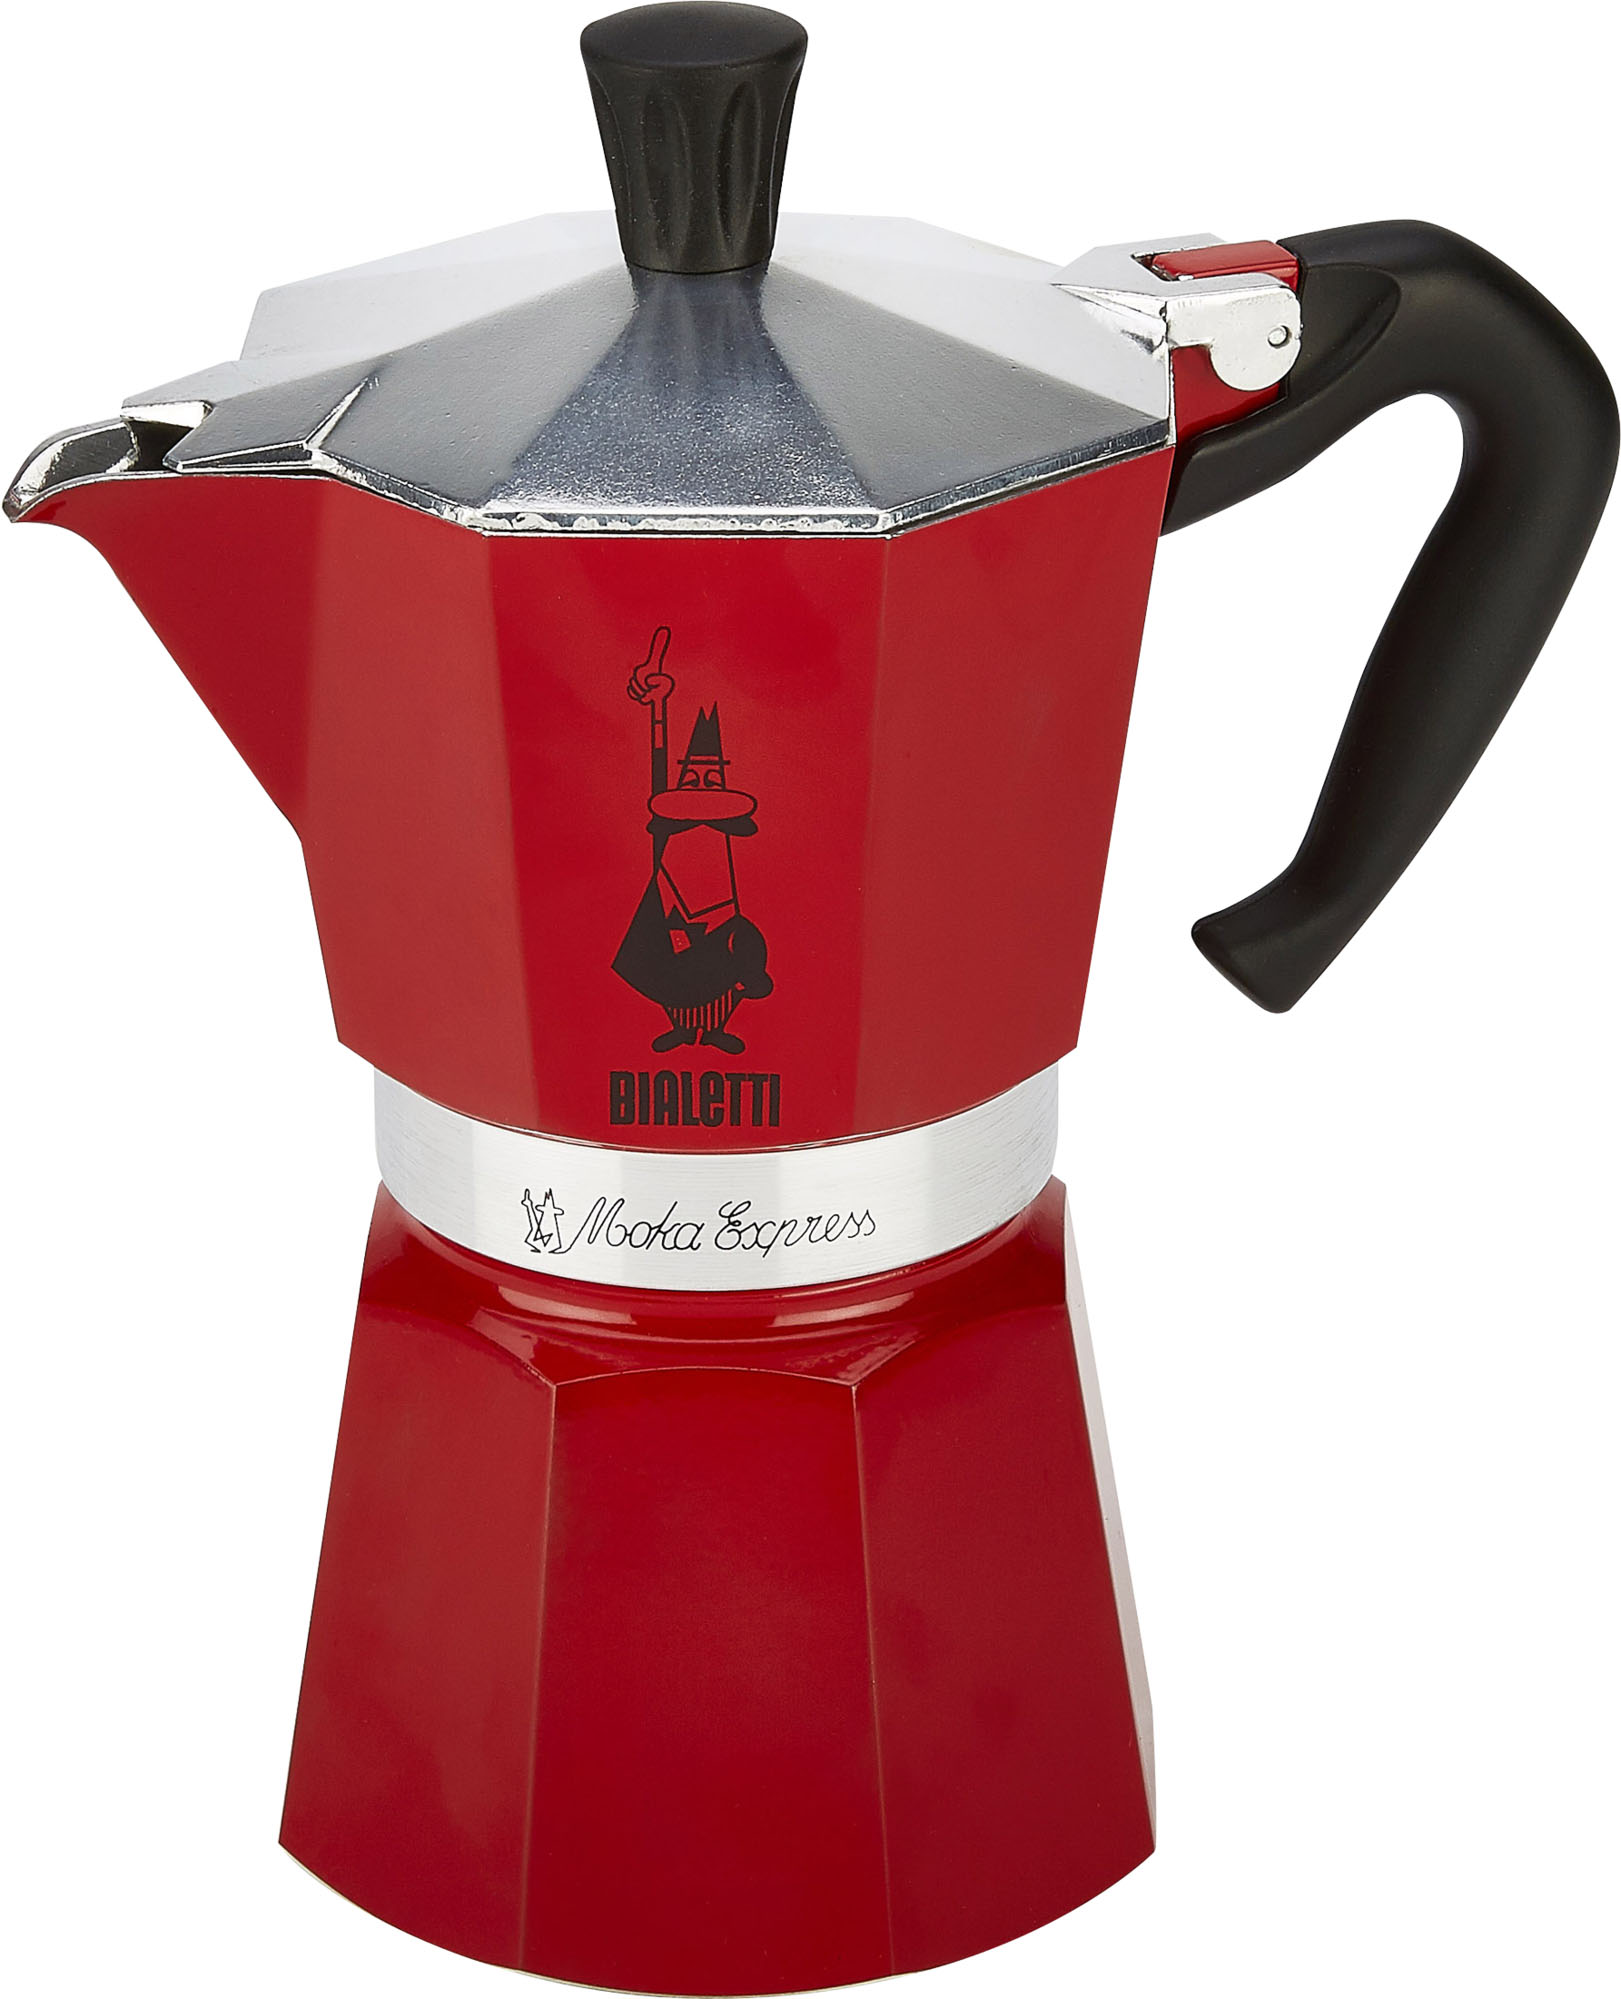 Rapid Stove Top Coffee Brewer,300ML 6‑Cup Capacity Aluminum Coffee Machine Moka Pot Accessories for Office Home Use Stovetop Espresso Maker Moka Pot for Great Flavored Strong Espresso Red 